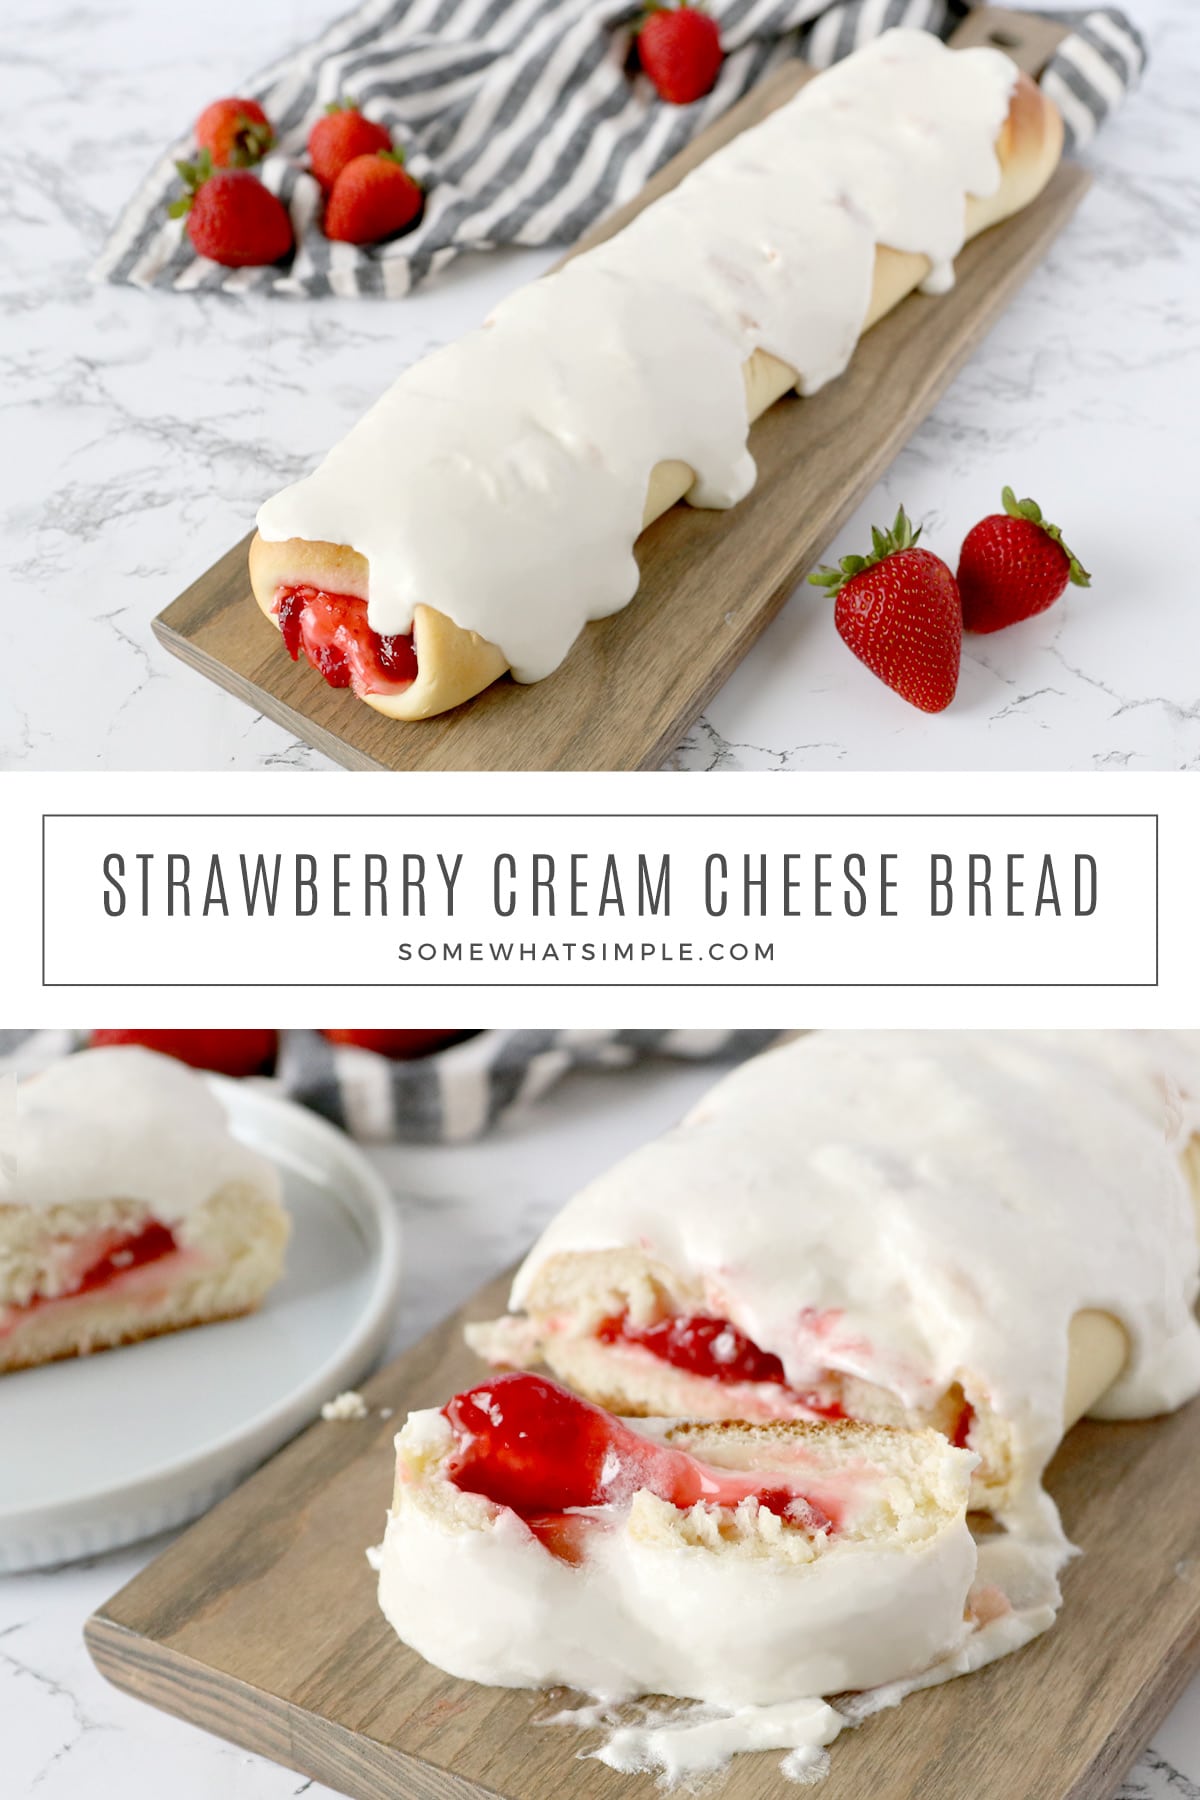 Braided cream cheese and strawberry bread is a great summer treat. It’s so easy to make and it tastes AMAZING! See how to make it here. via @somewhatsimple